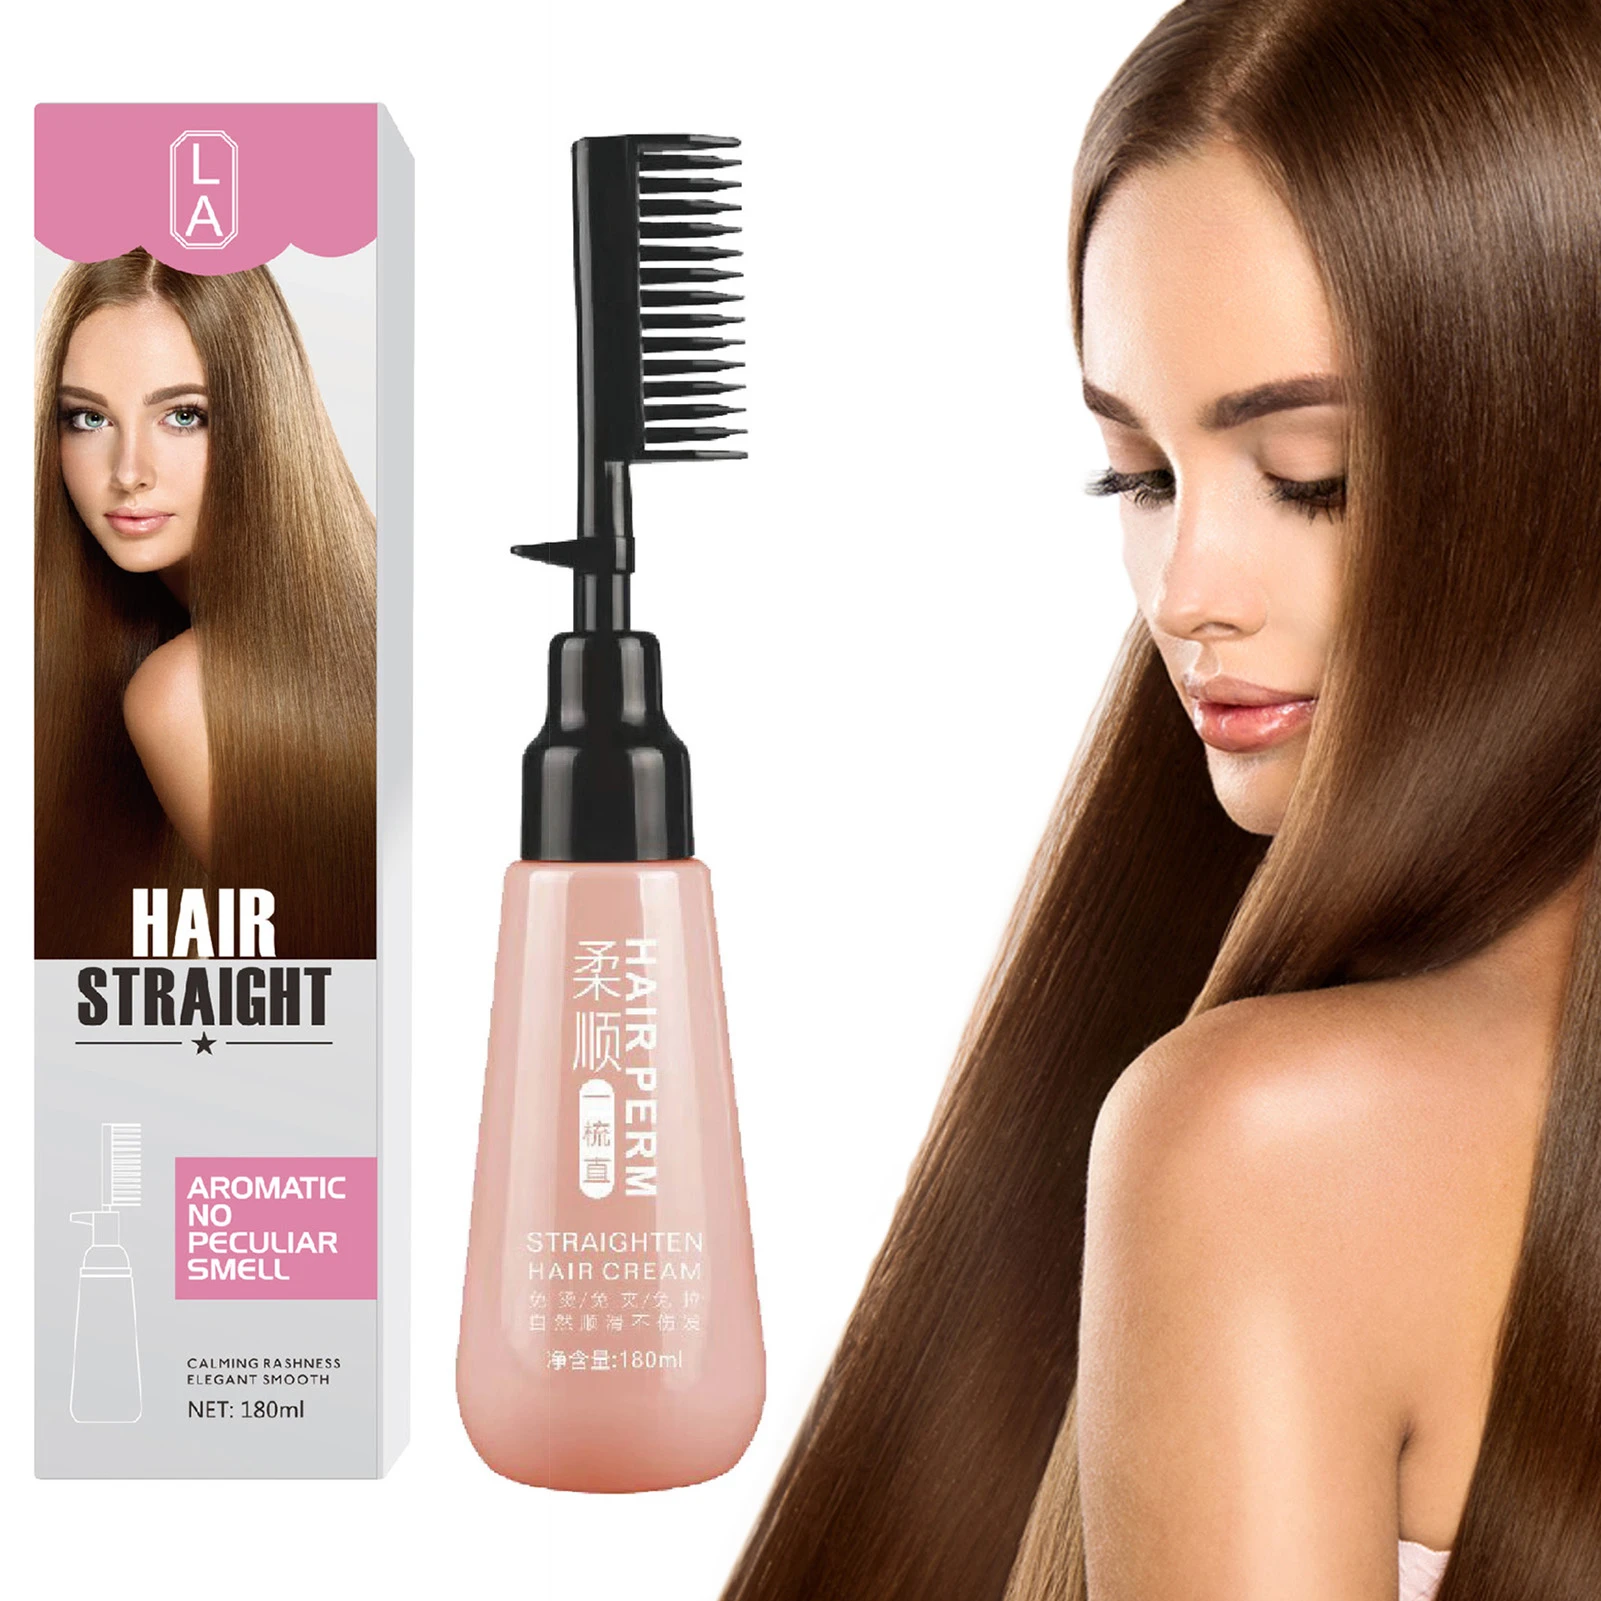 Gloss Hair Cream Hair Cream With Built in Styling Brush To Moisturize Hair  And Strengthen The Roots 2 in 1 Hair Straightening| | - AliExpress